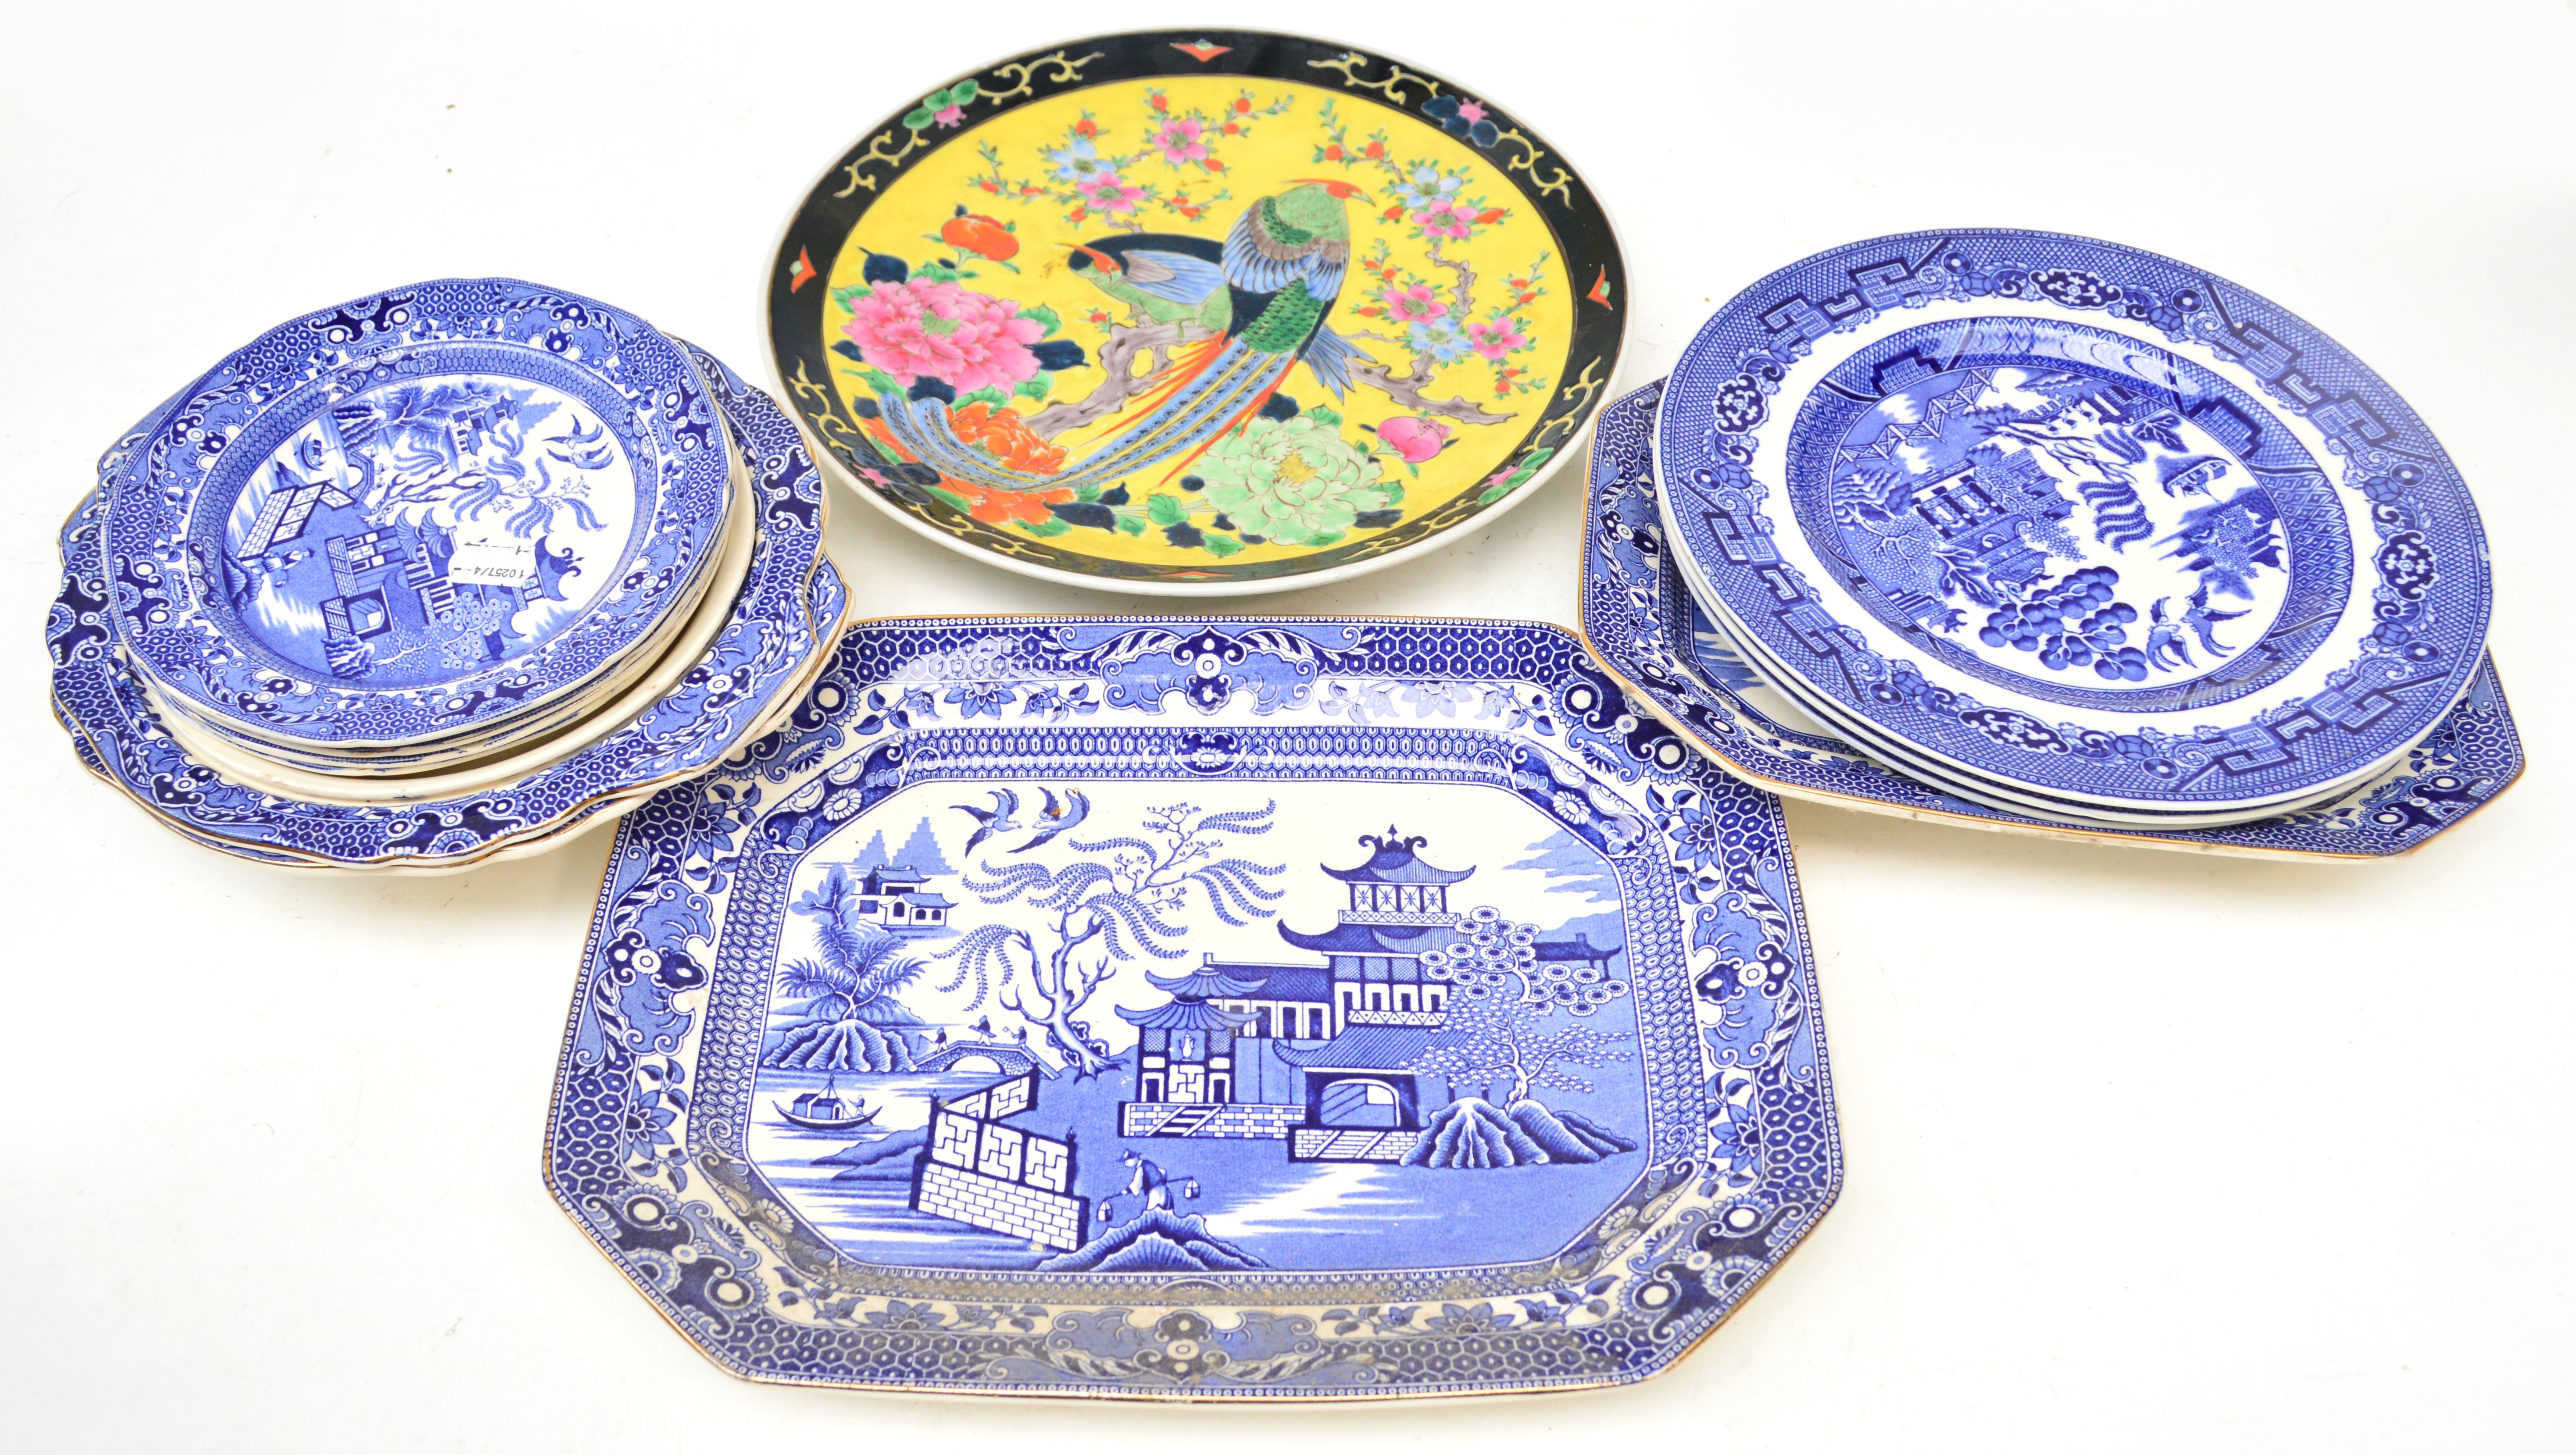 A quantity of blue and white willow pattern dinner and tea ware and a Japanese charger decorated